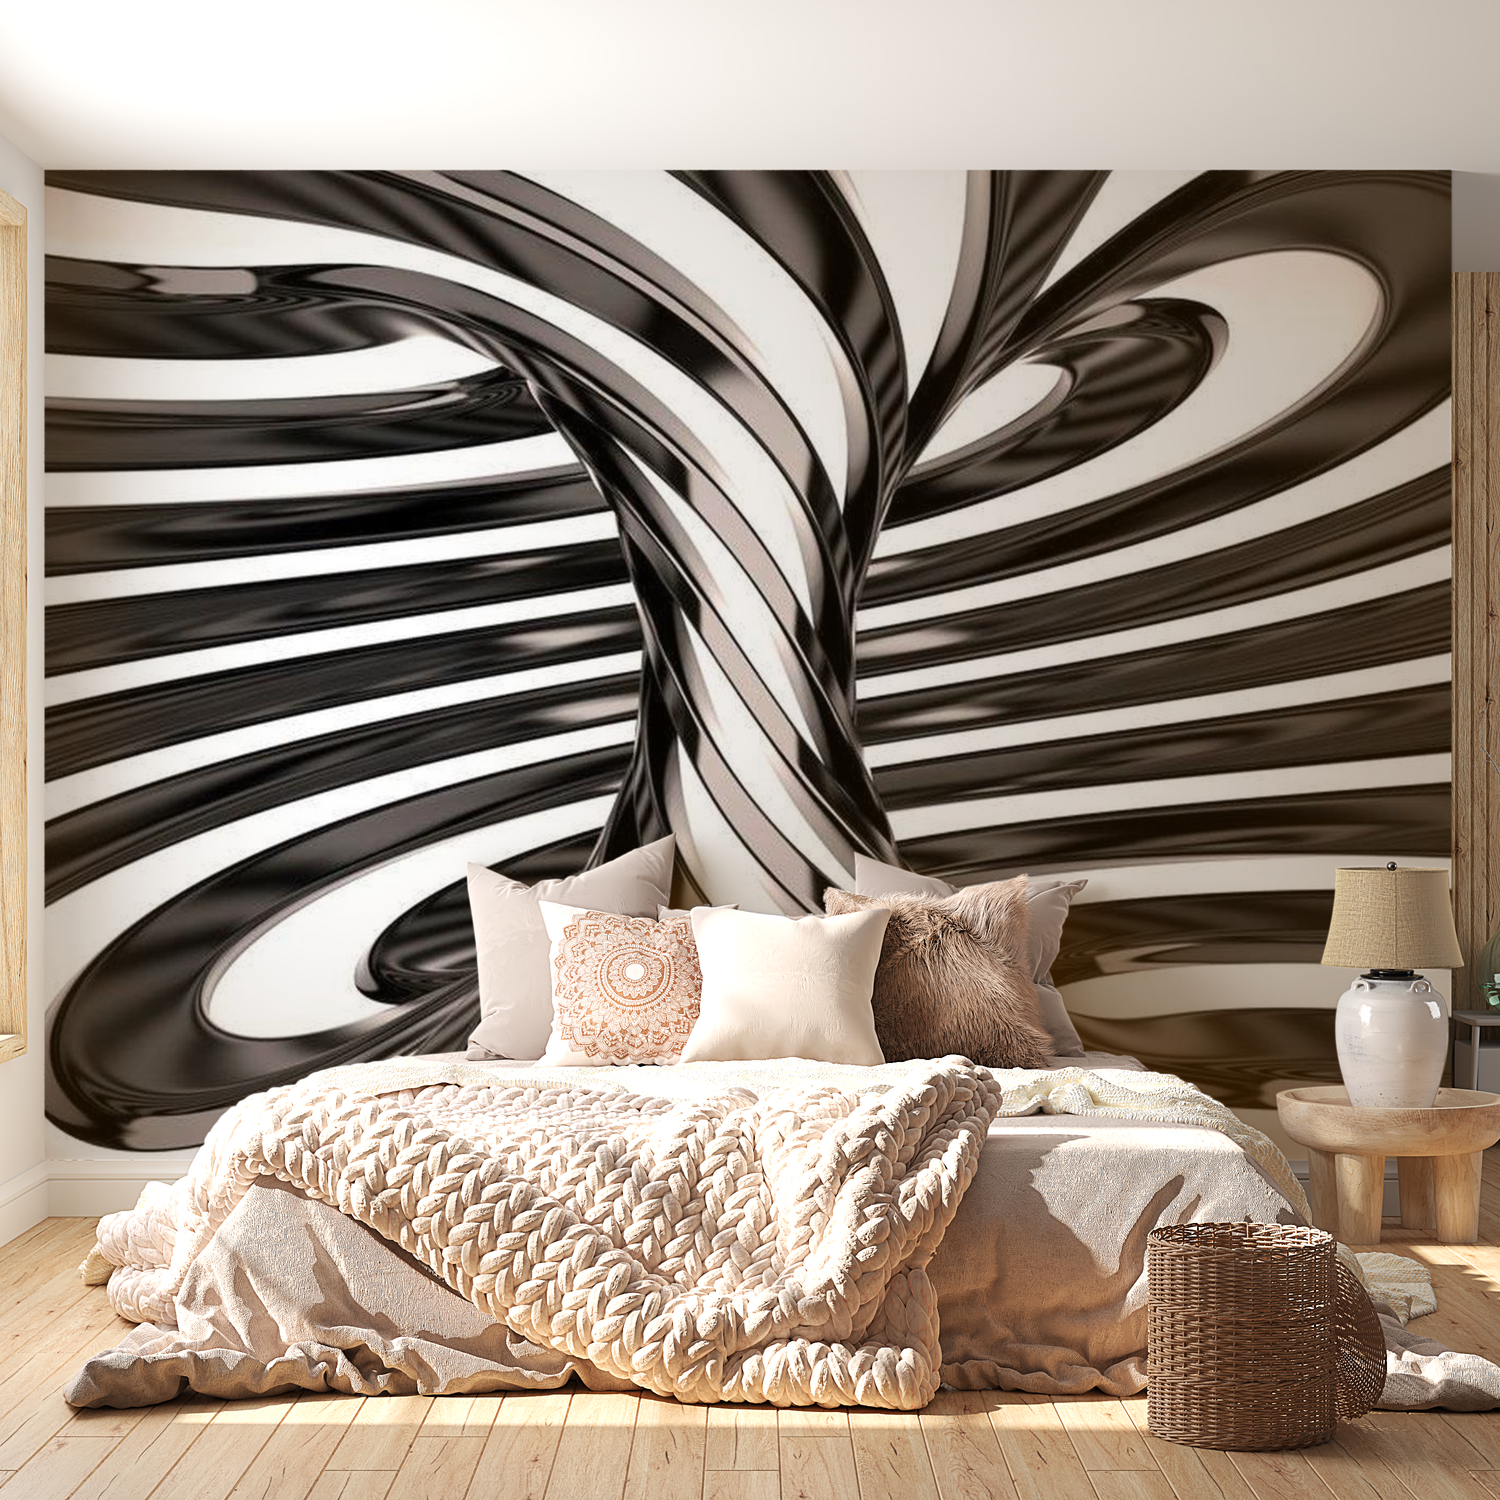 3D Illusion Wallpaper Wall Mural - Black And White Swirl 39"Wx27"H